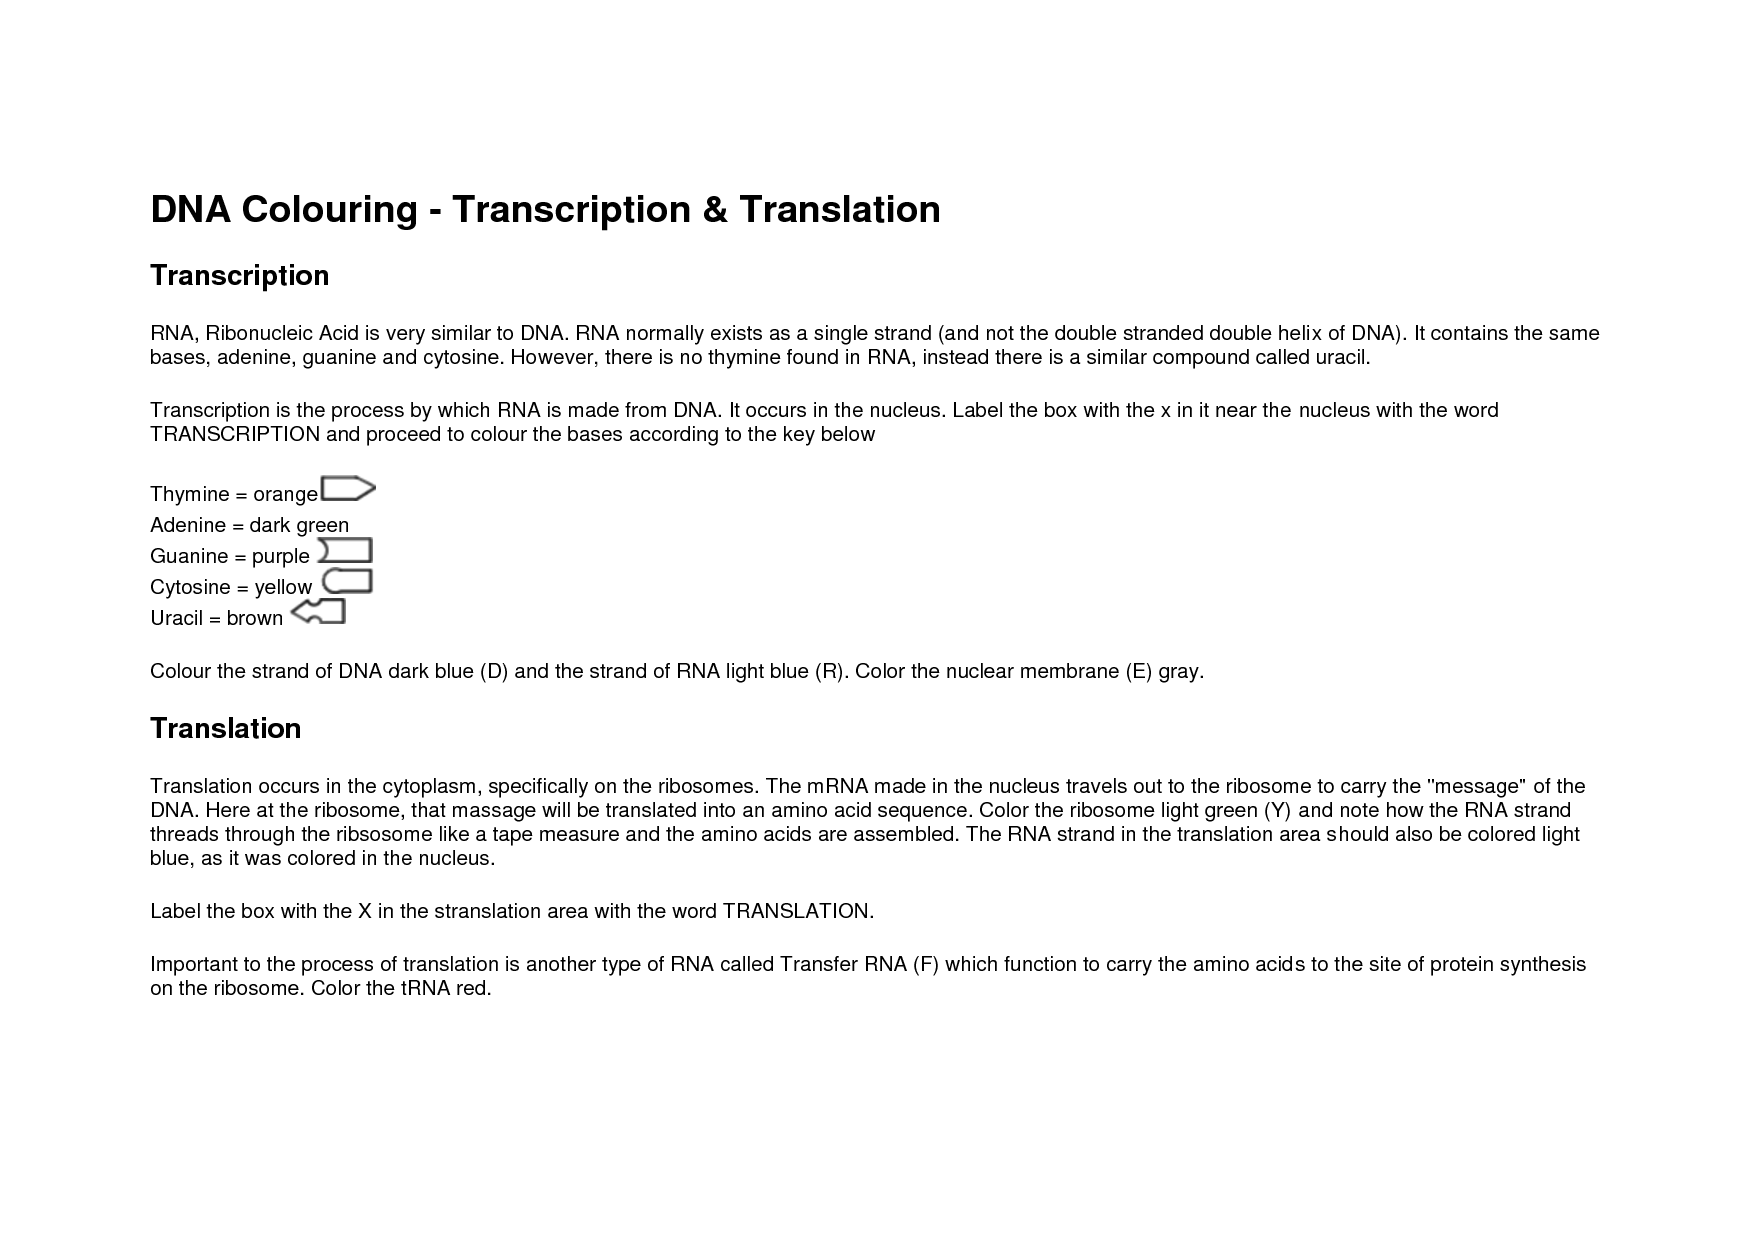 Answers To Dna Coloring Transcription And Translation